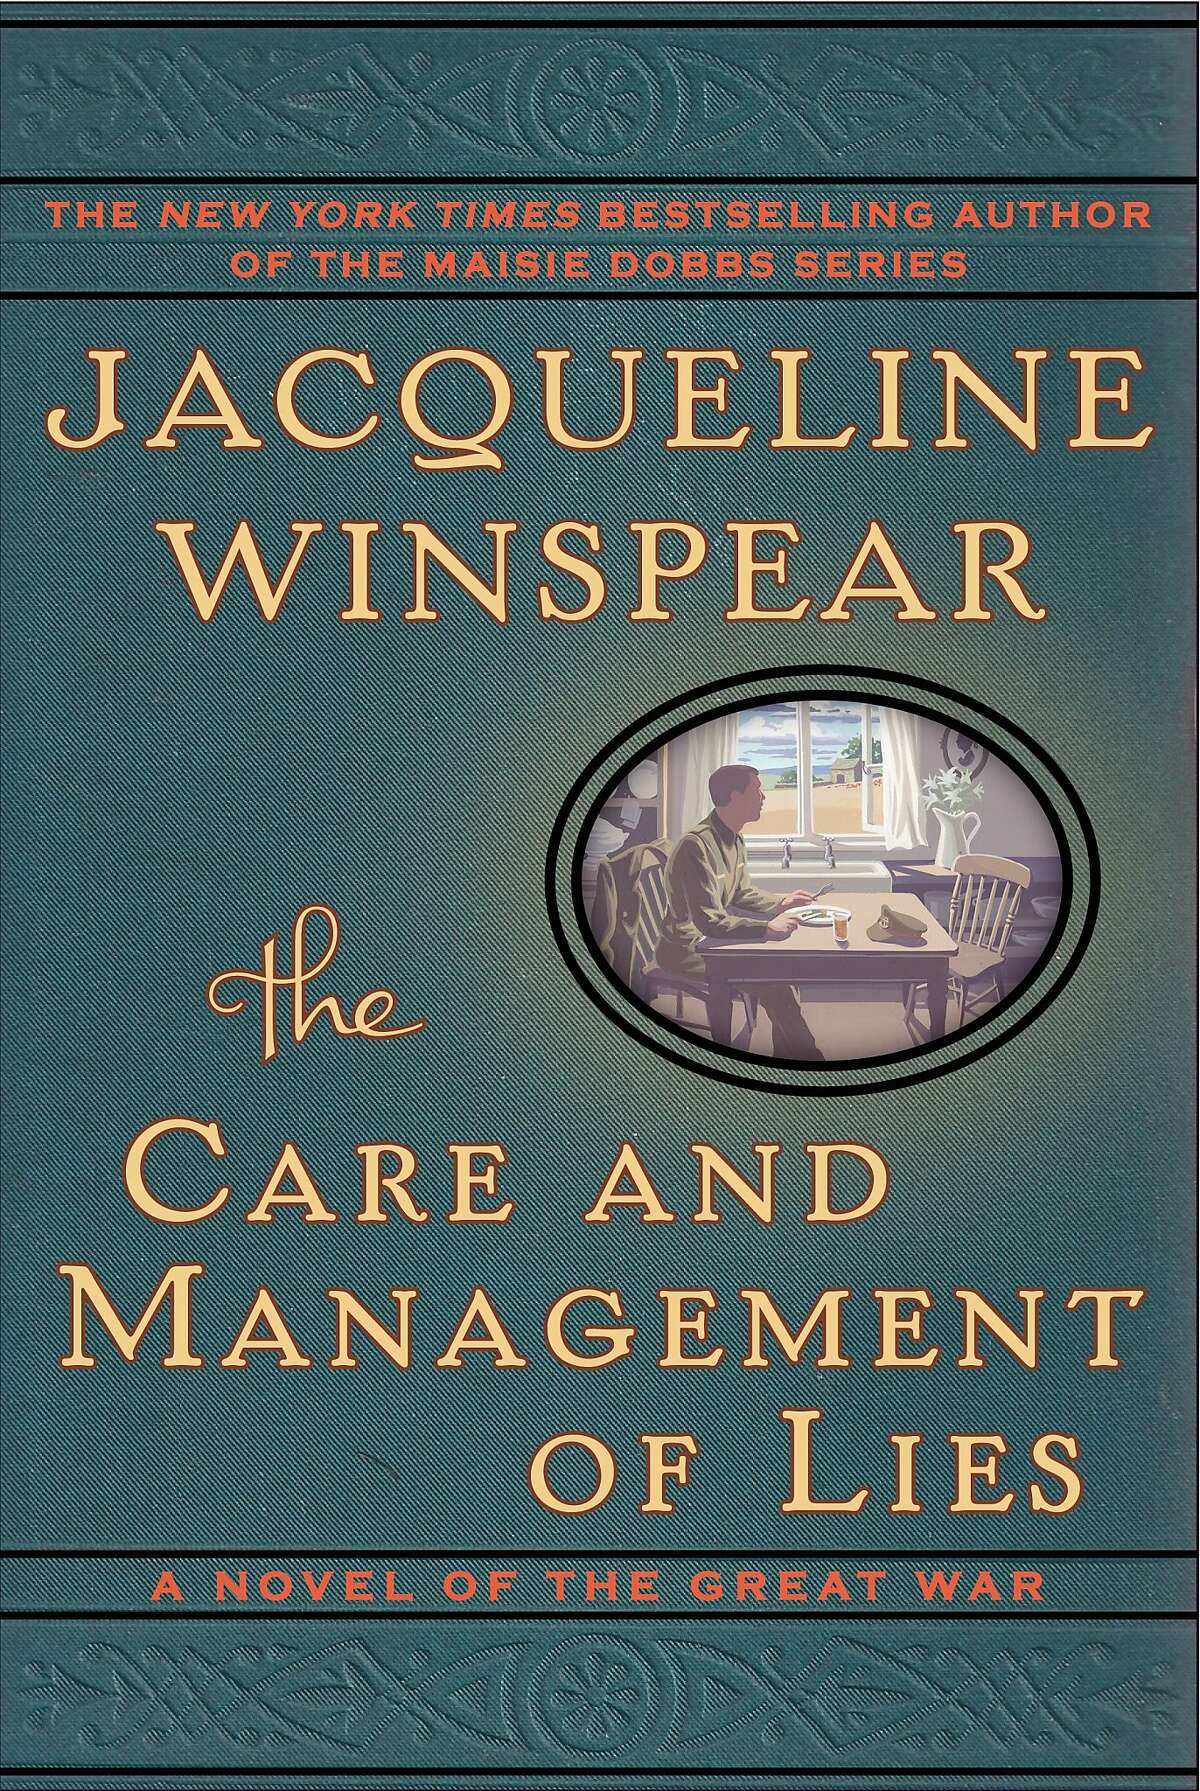 "The Care and Management of Lies," by Jacqueline Winspear